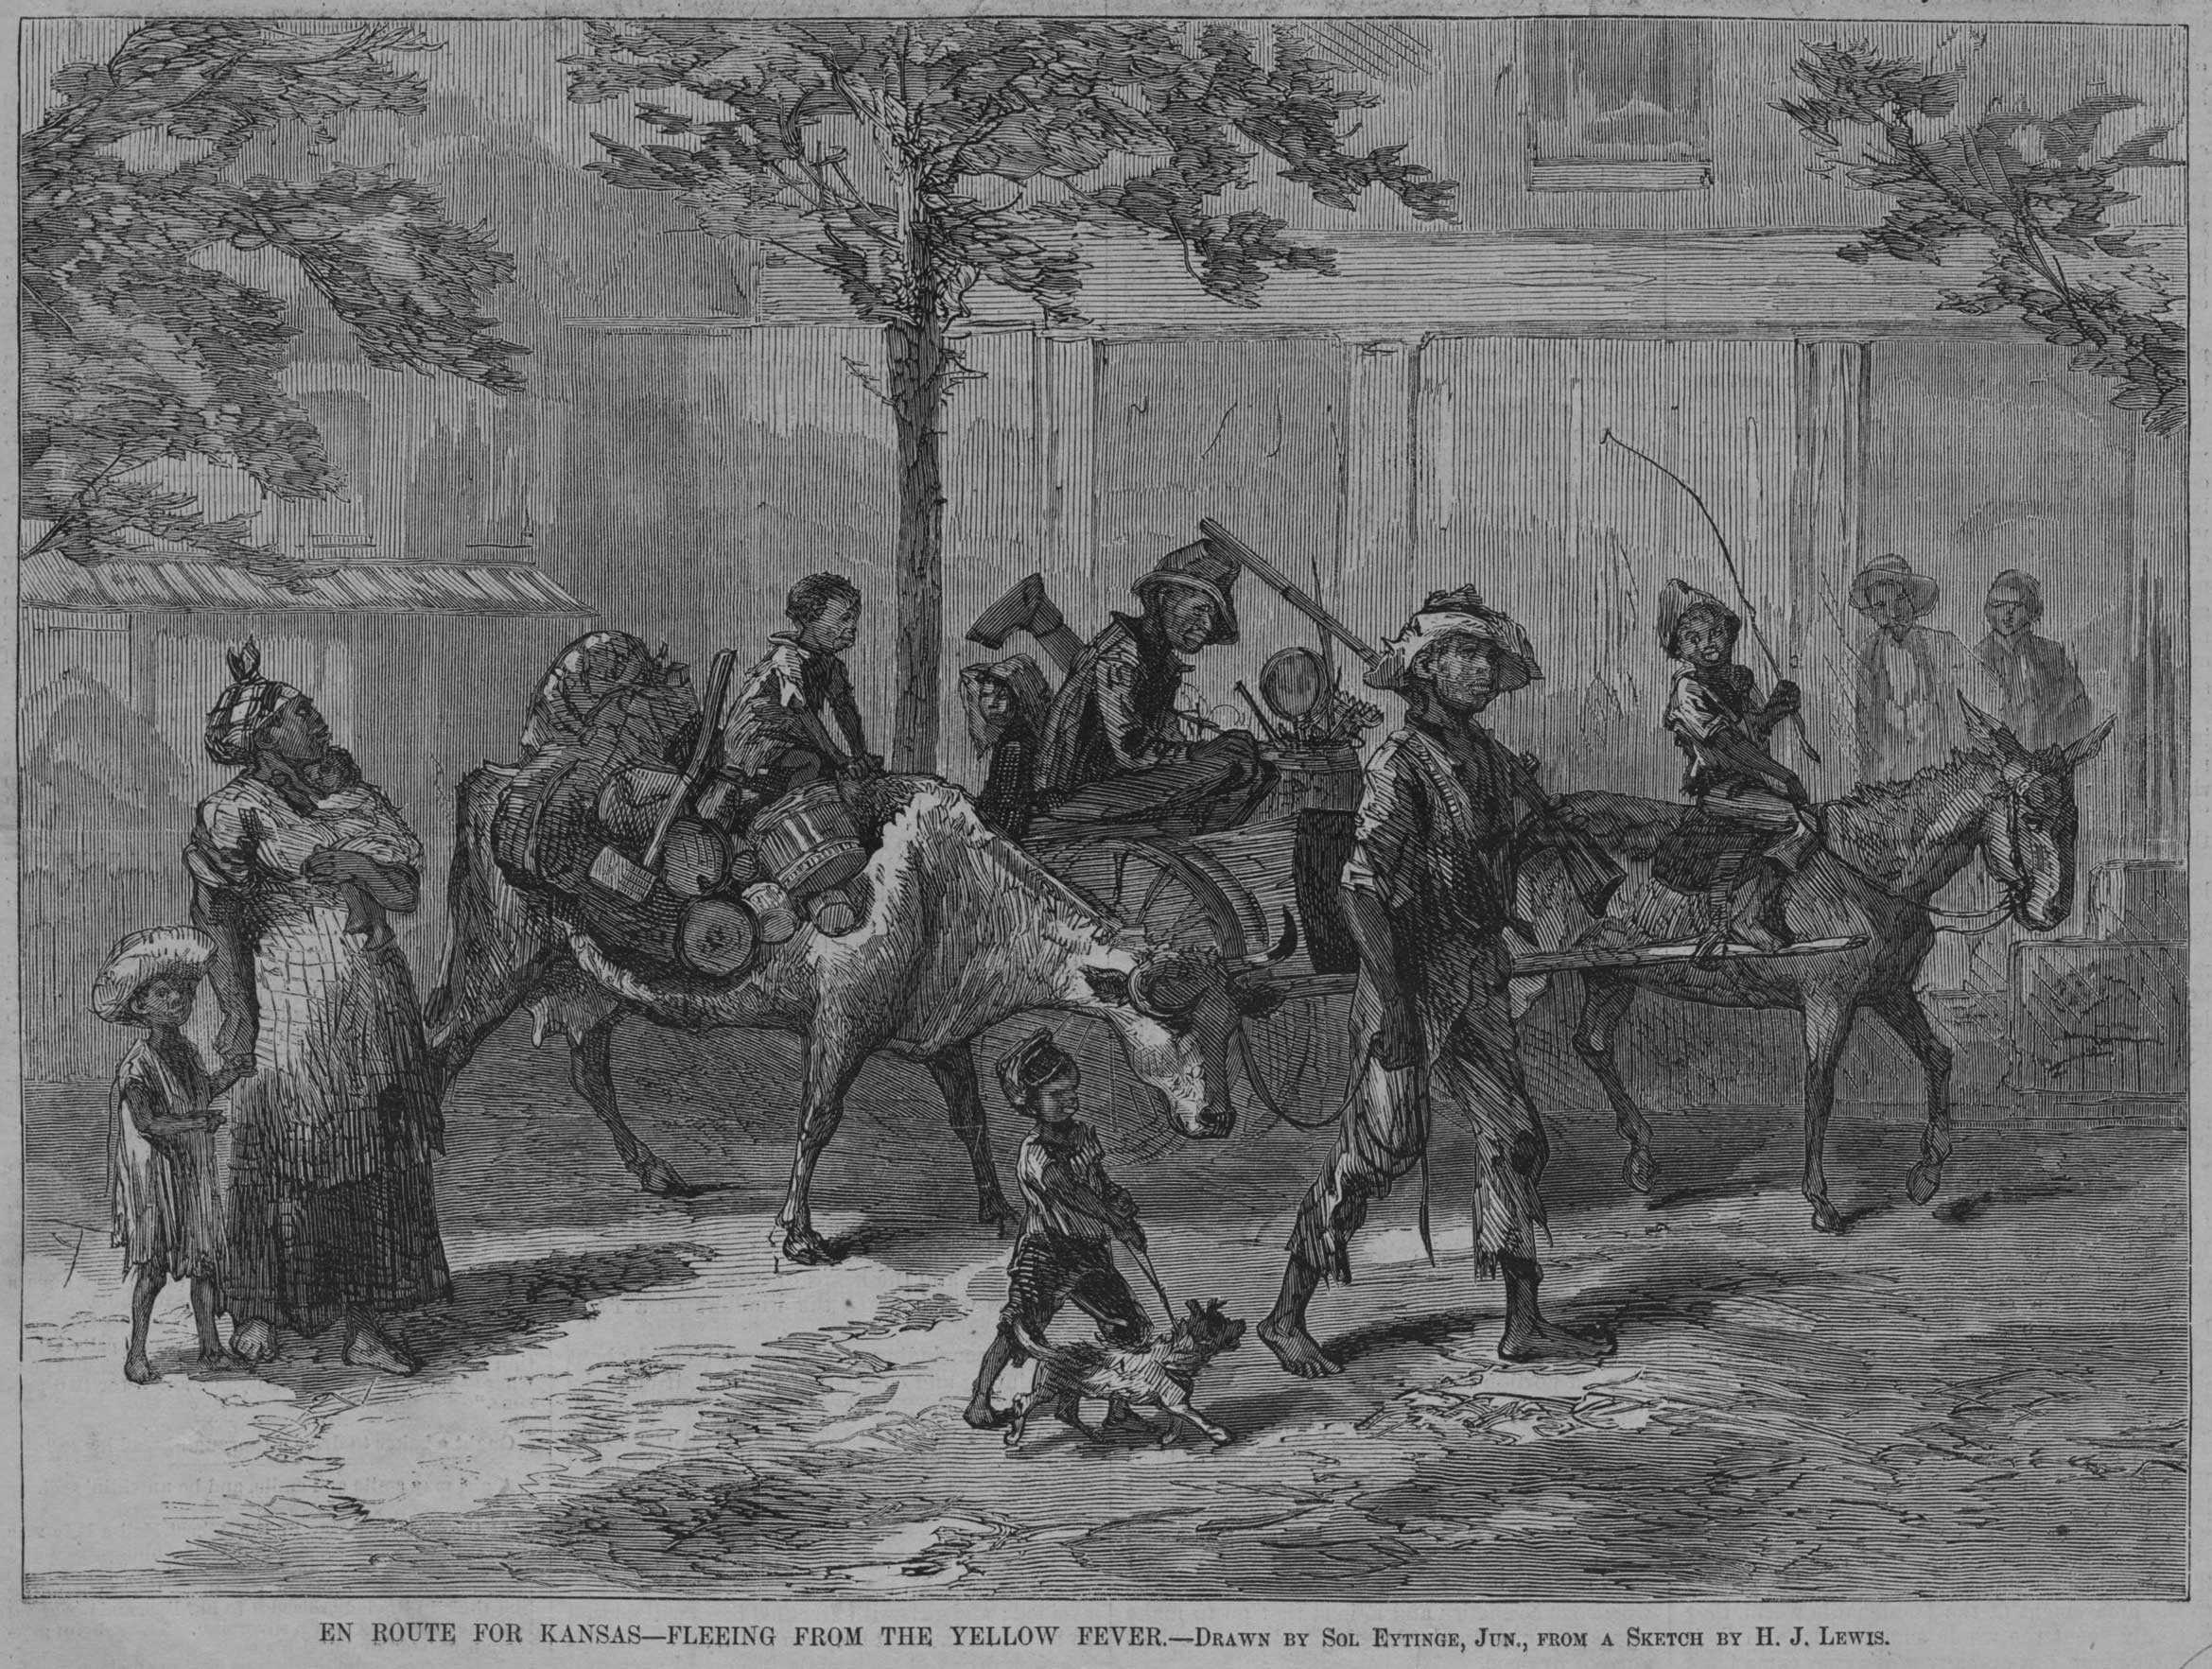 A drawing of African Americans, including some children, walking with an ox and mule.